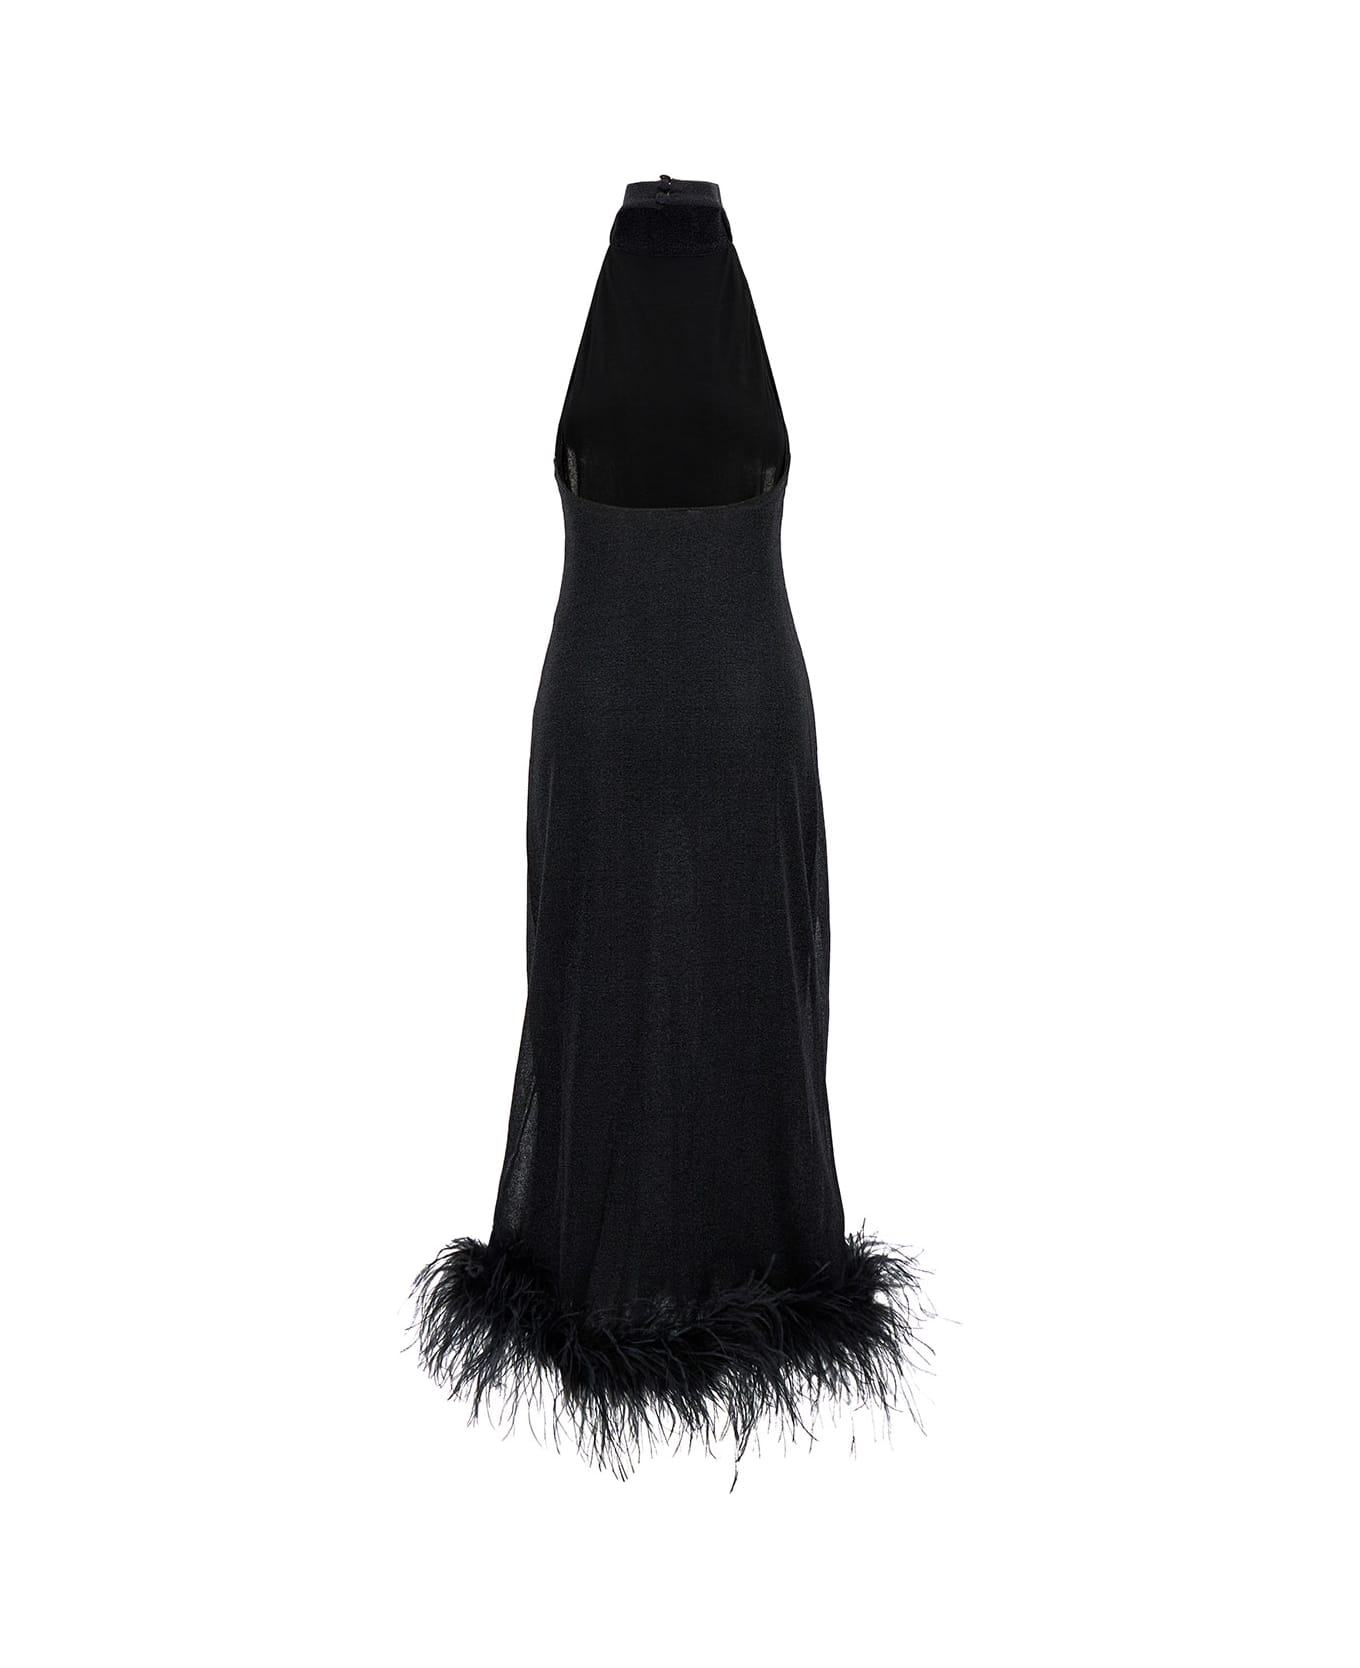 Oseree Long Black Dress With High Neck And Feathers In Lurex Woman - Black